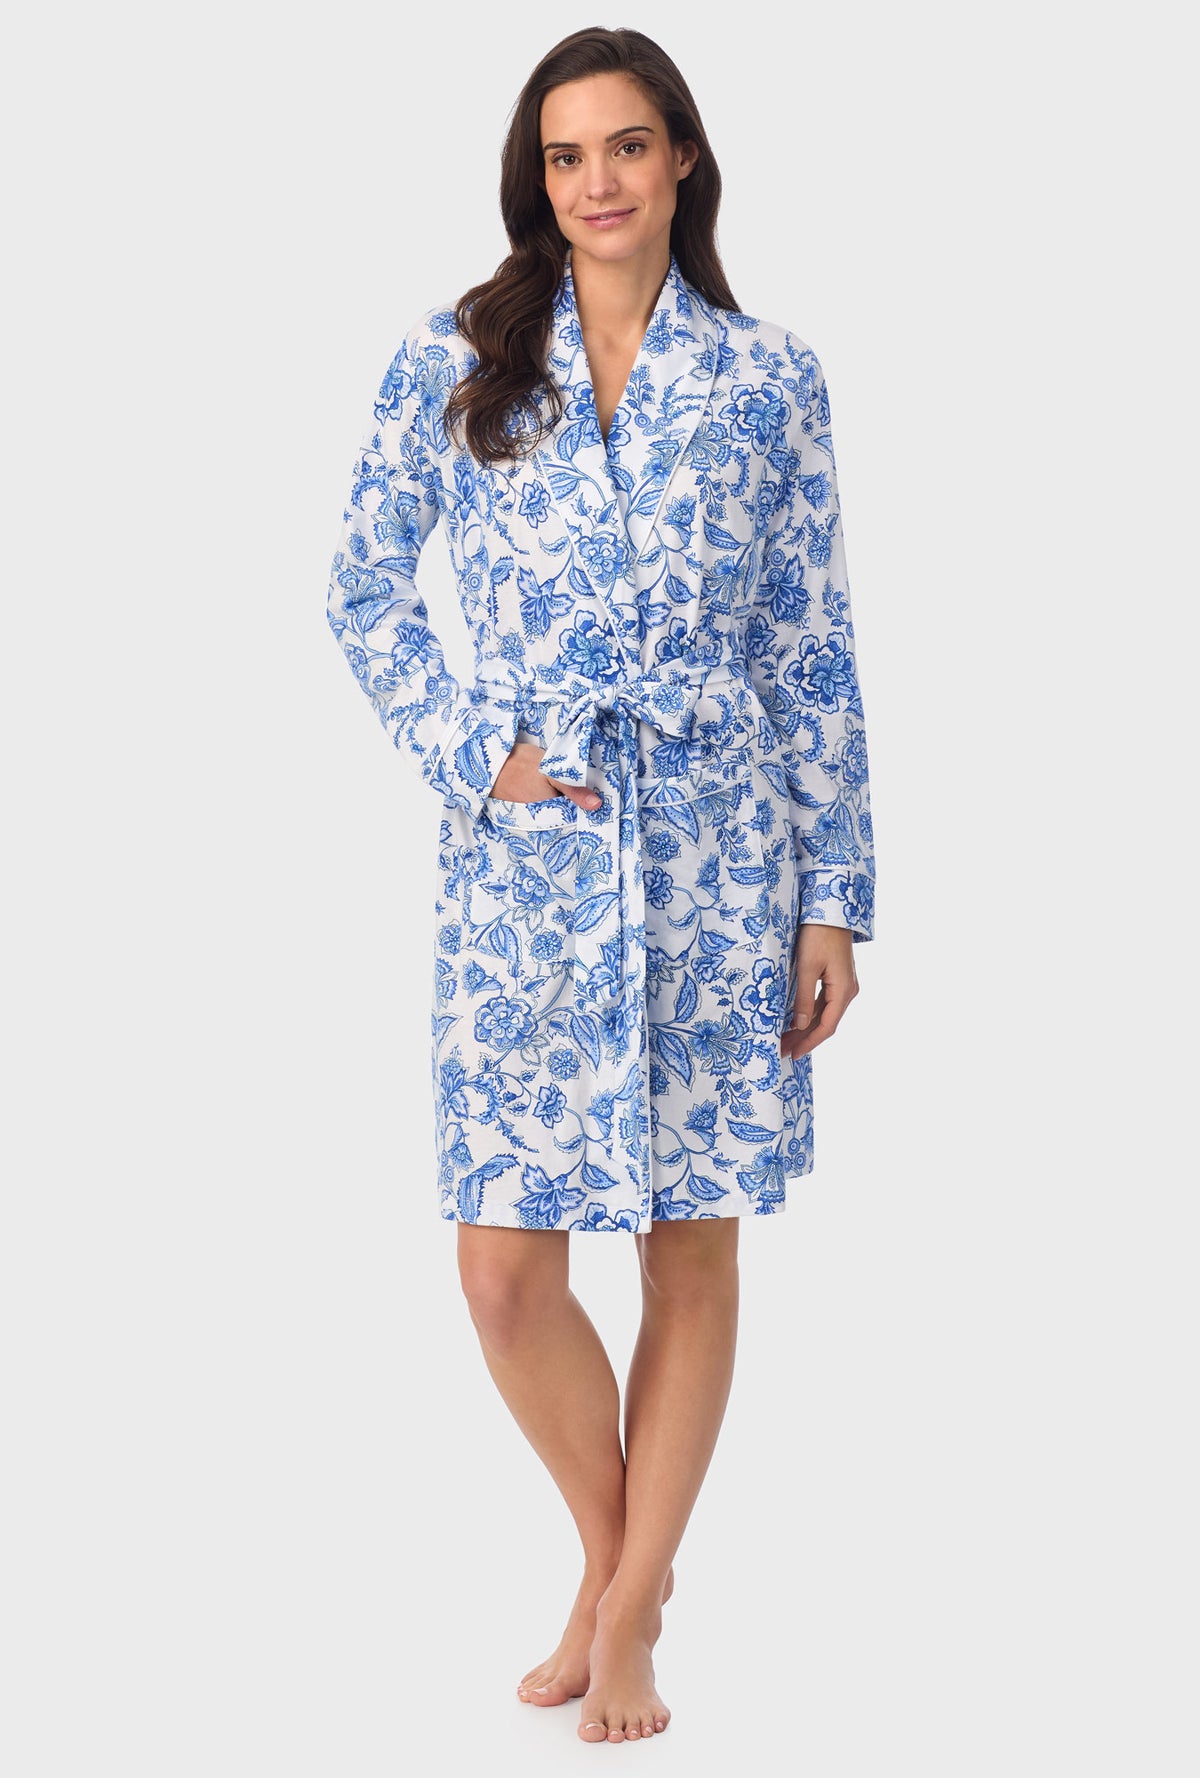 A lady wearing blue long Sleeve Floral Vine Wrap Robe with Colbalt Blue print